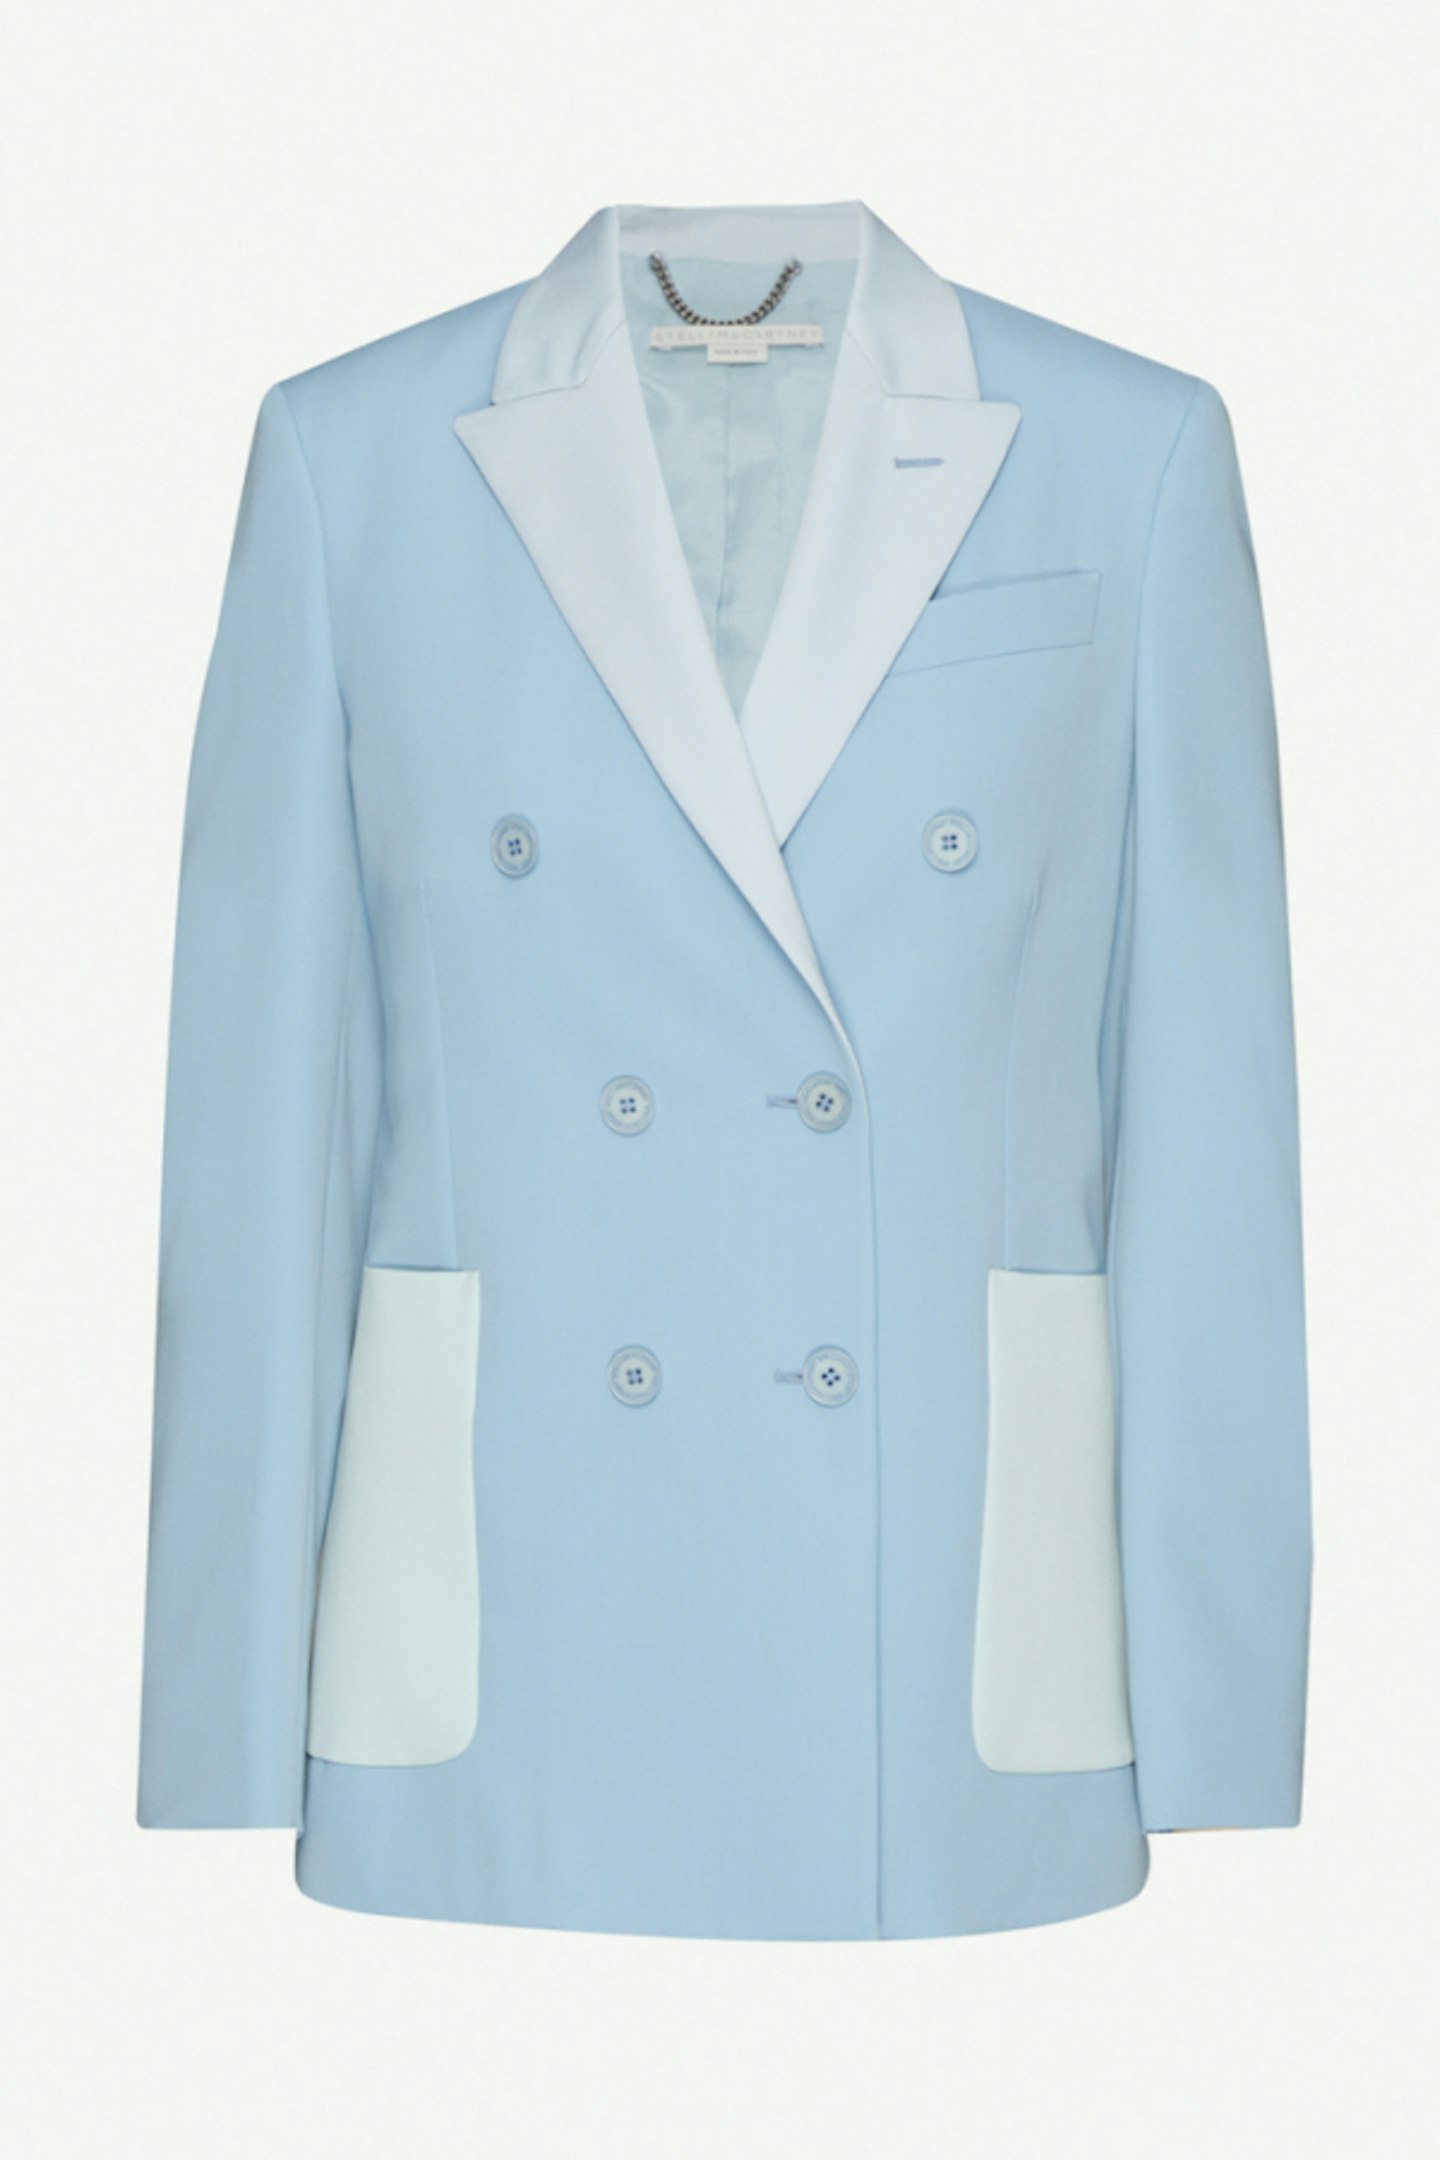 Stella McCartney, Double Breasted Wool Blazer, Rent From £63